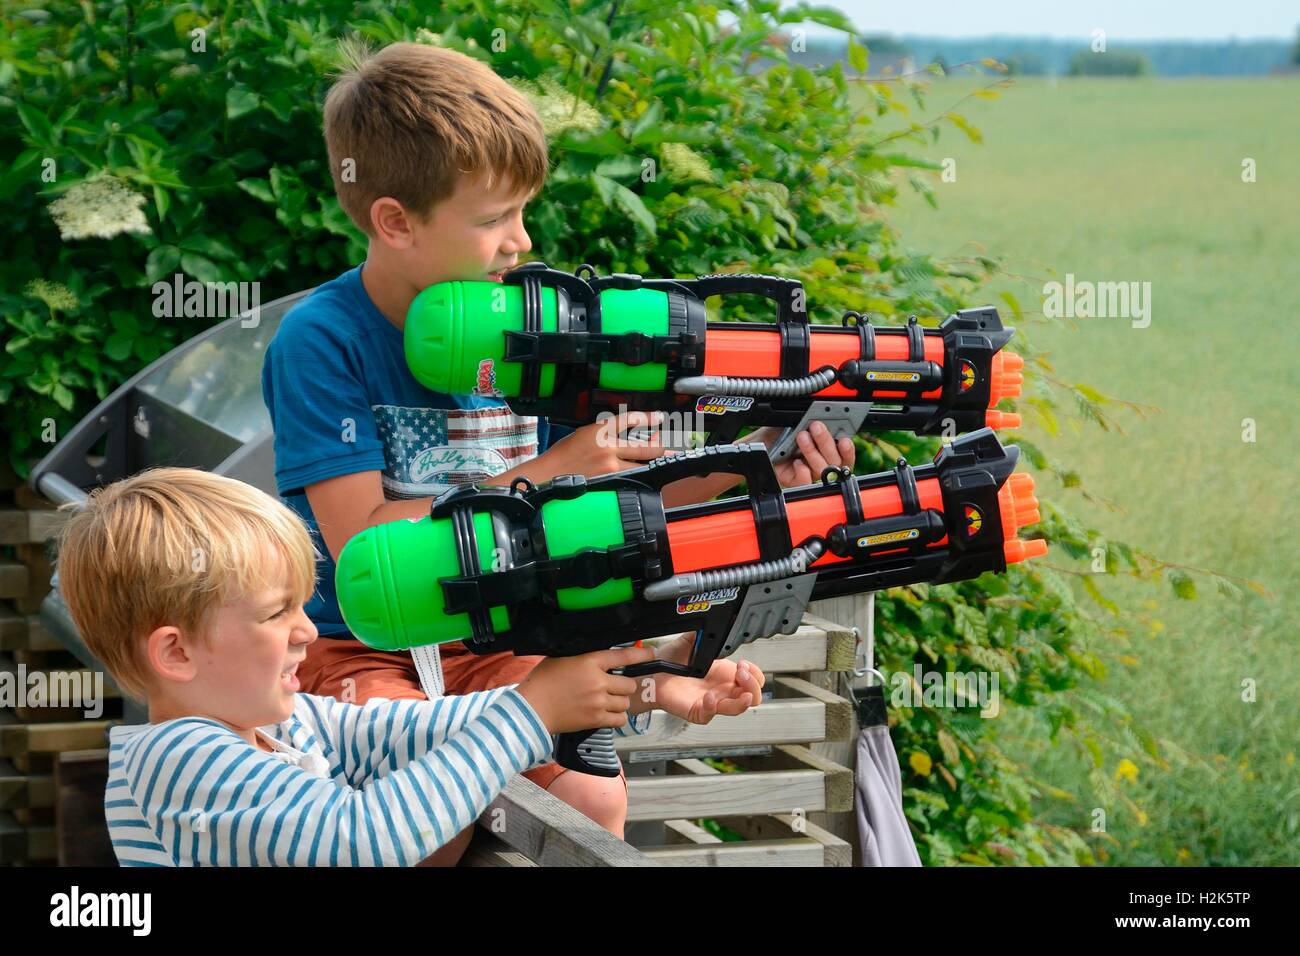 Two boys, 6 and 8 years old, playing with toy guns, Sweden Stock Photo